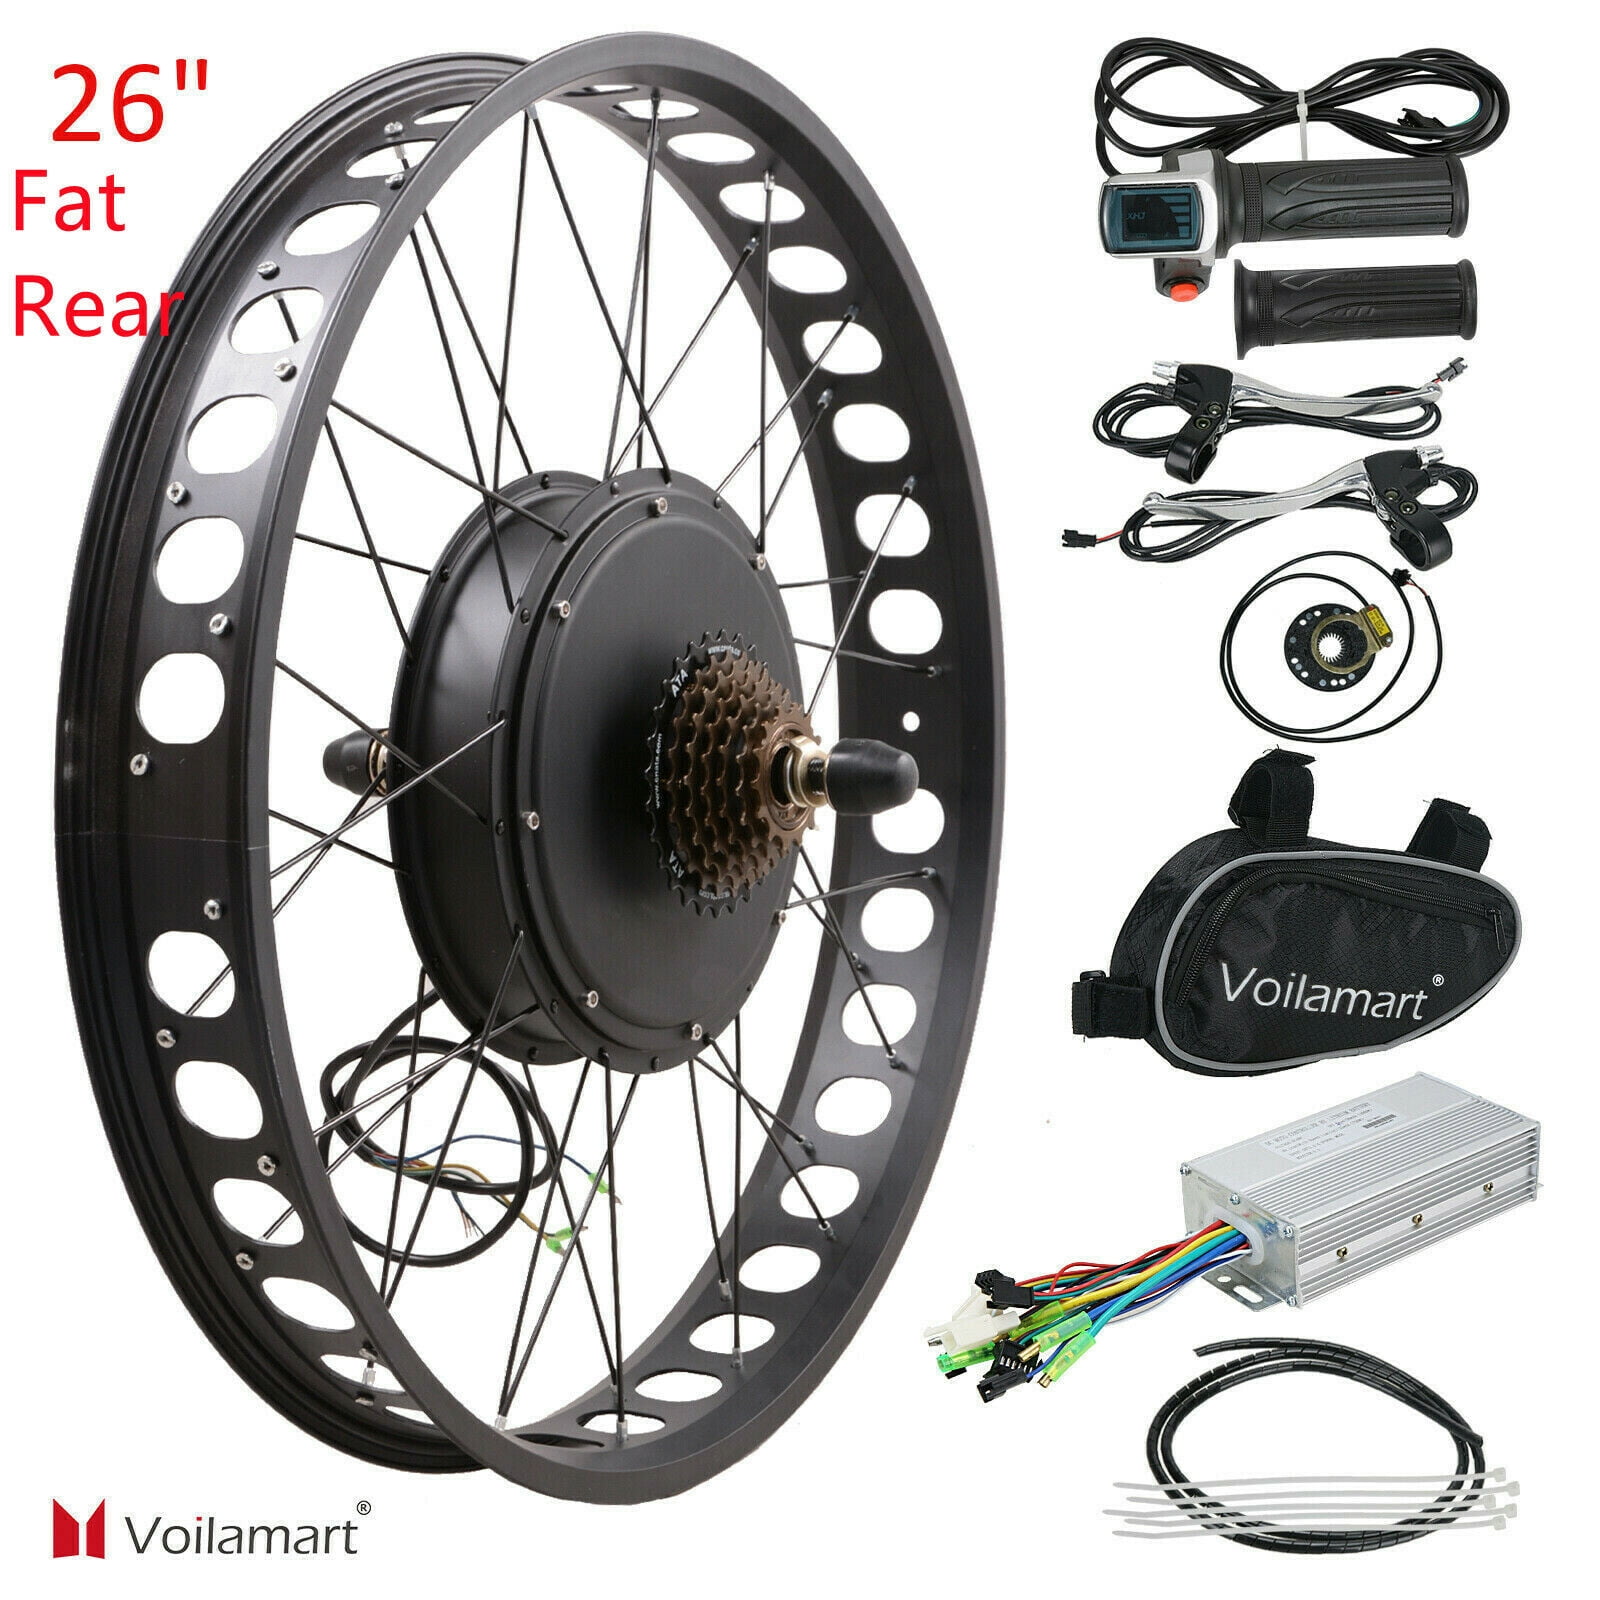 Details about   26" 1000W 48V Electric Bike Fat Tire Front/Rear Wheel Bicycle Motor Conversion 